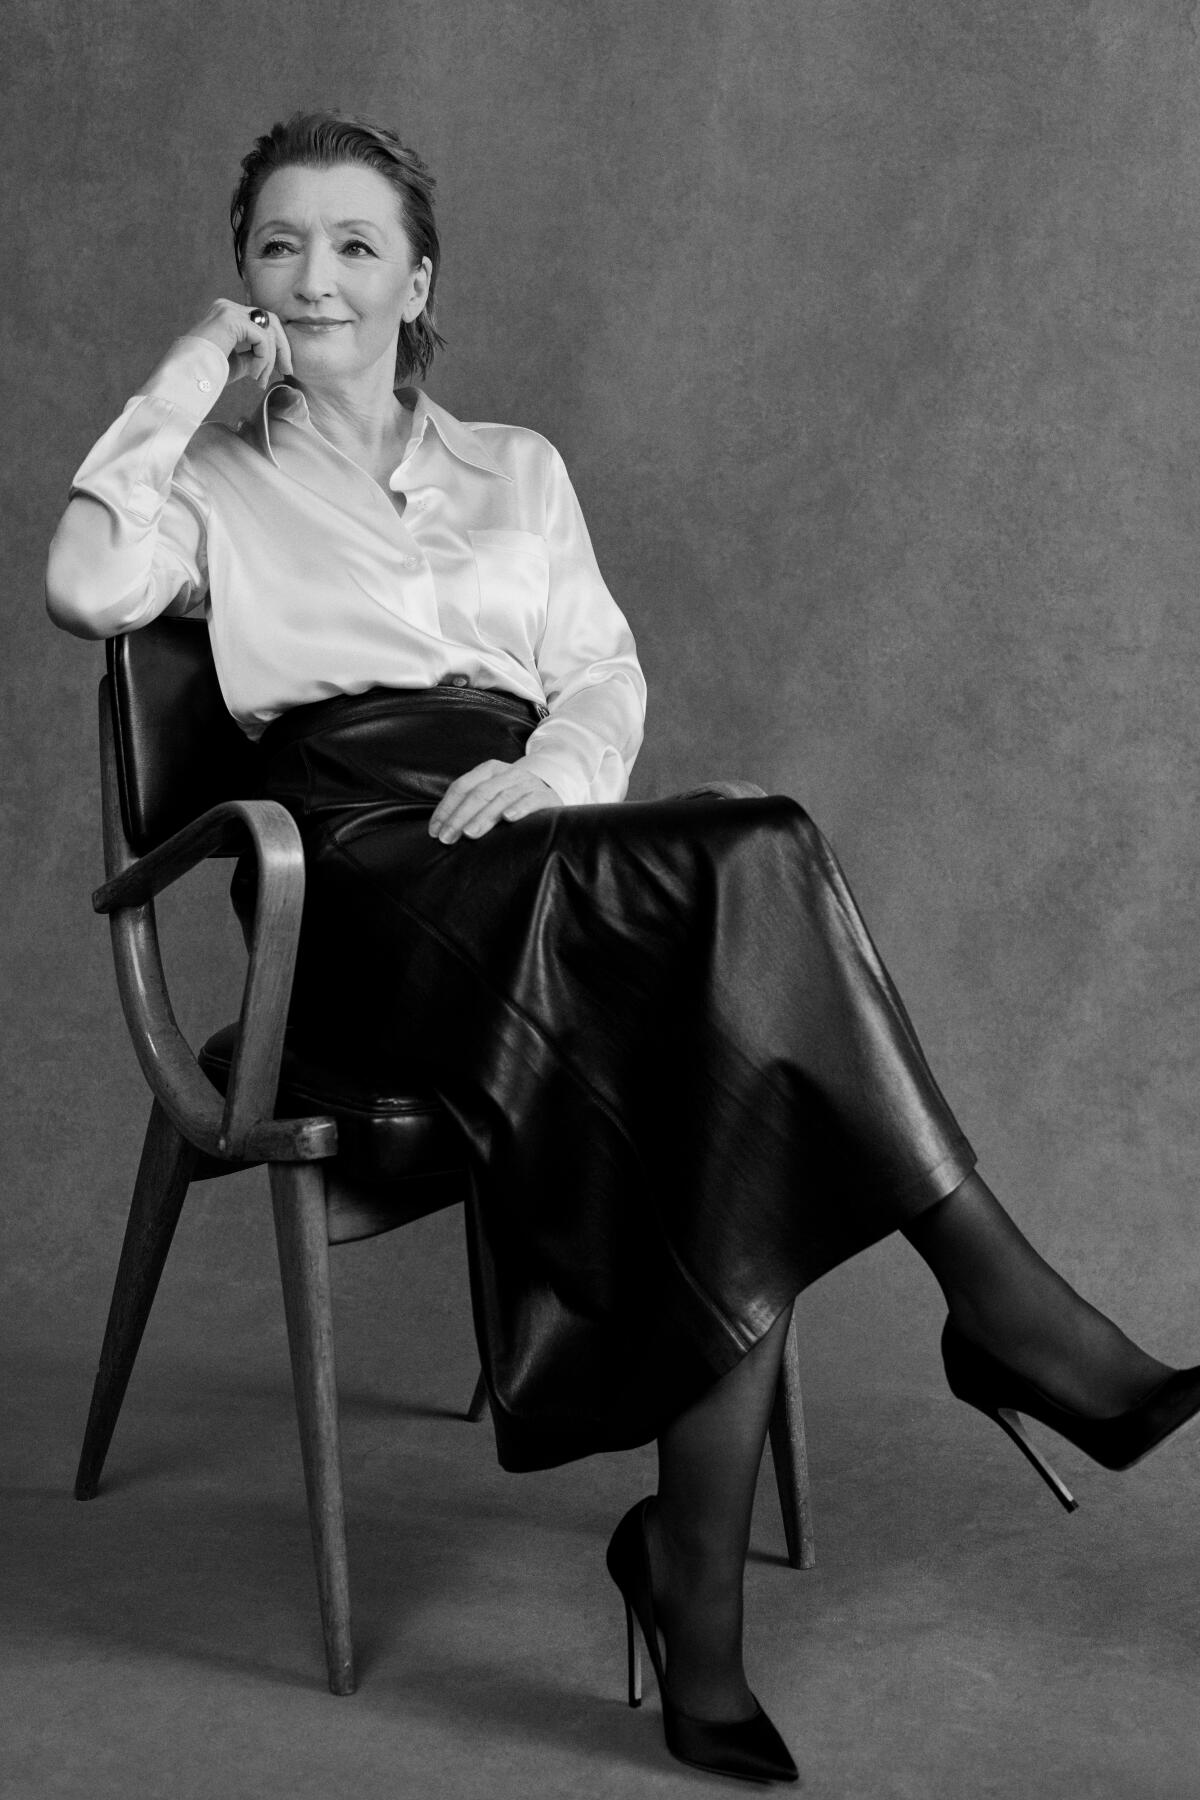 Lesley Manville in a white shirt and dark skirt sits on a chair with her hand resting on the side of her face.